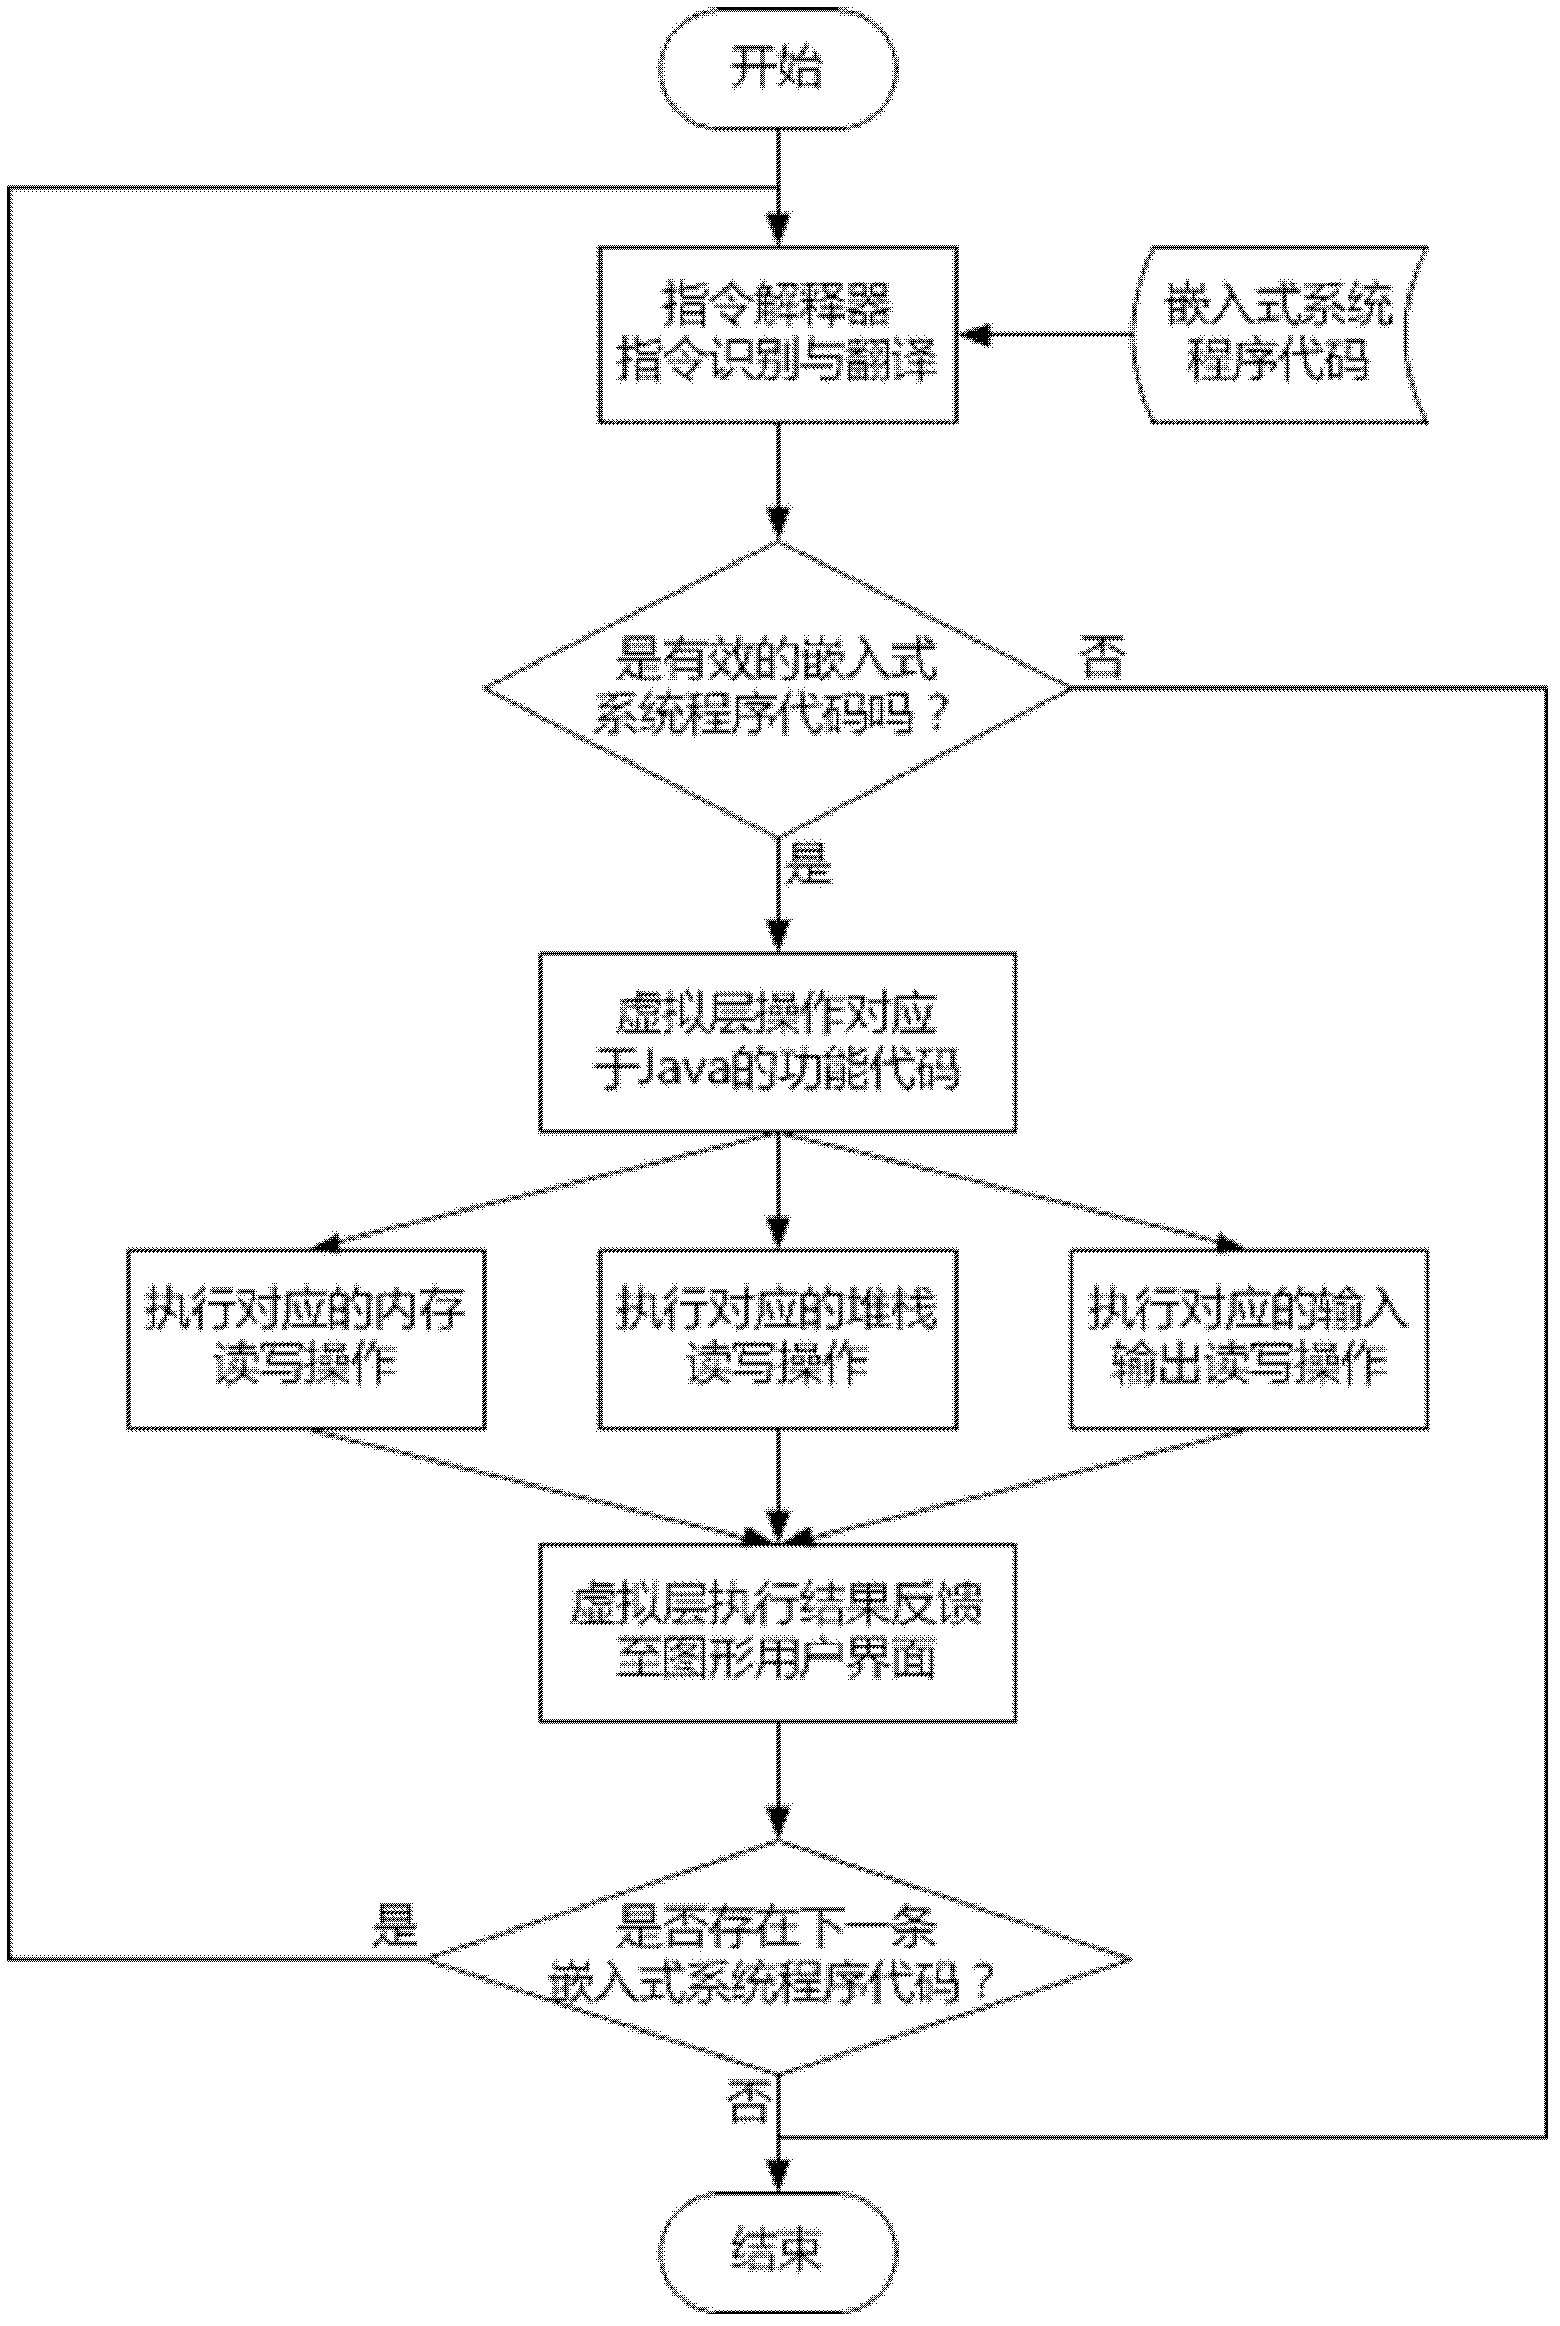 Method for realizing 8-bit embedded CPU (central processing unit) simulation running environment by aid of Java